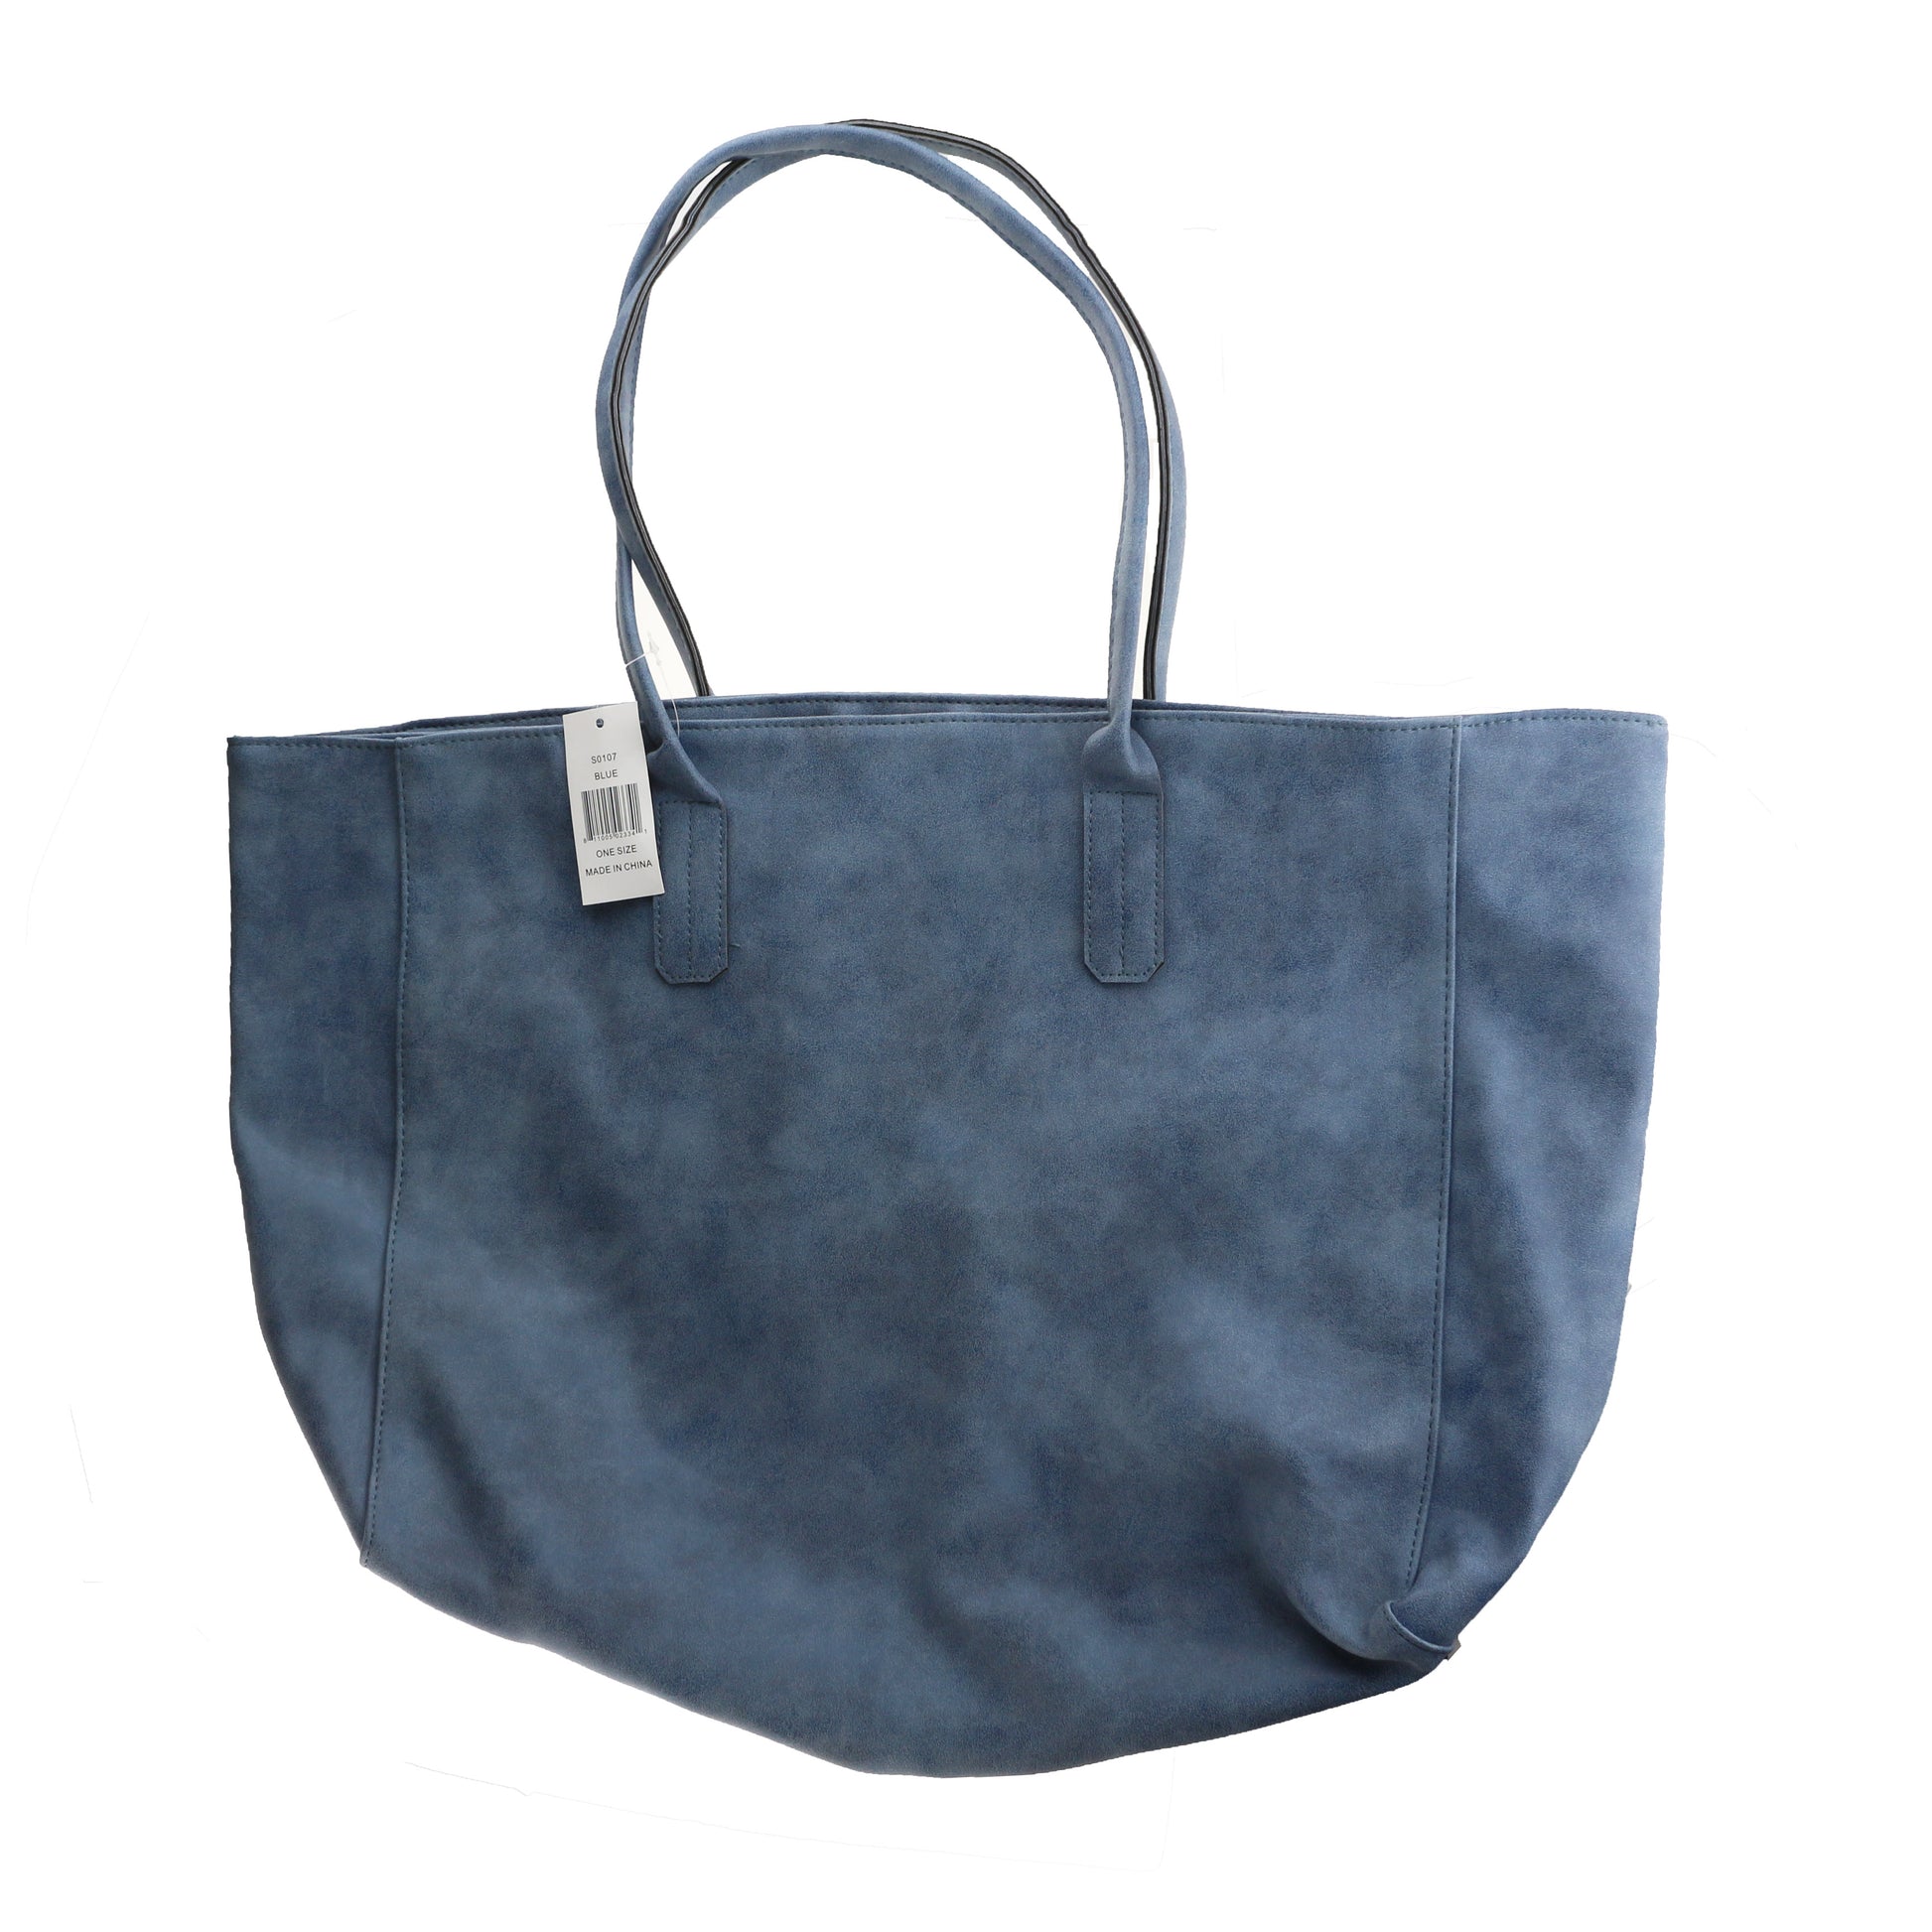 Saks Fifth Avenue 'Soft Blue Faux Leather Large' Tote Bag New Tote Bag